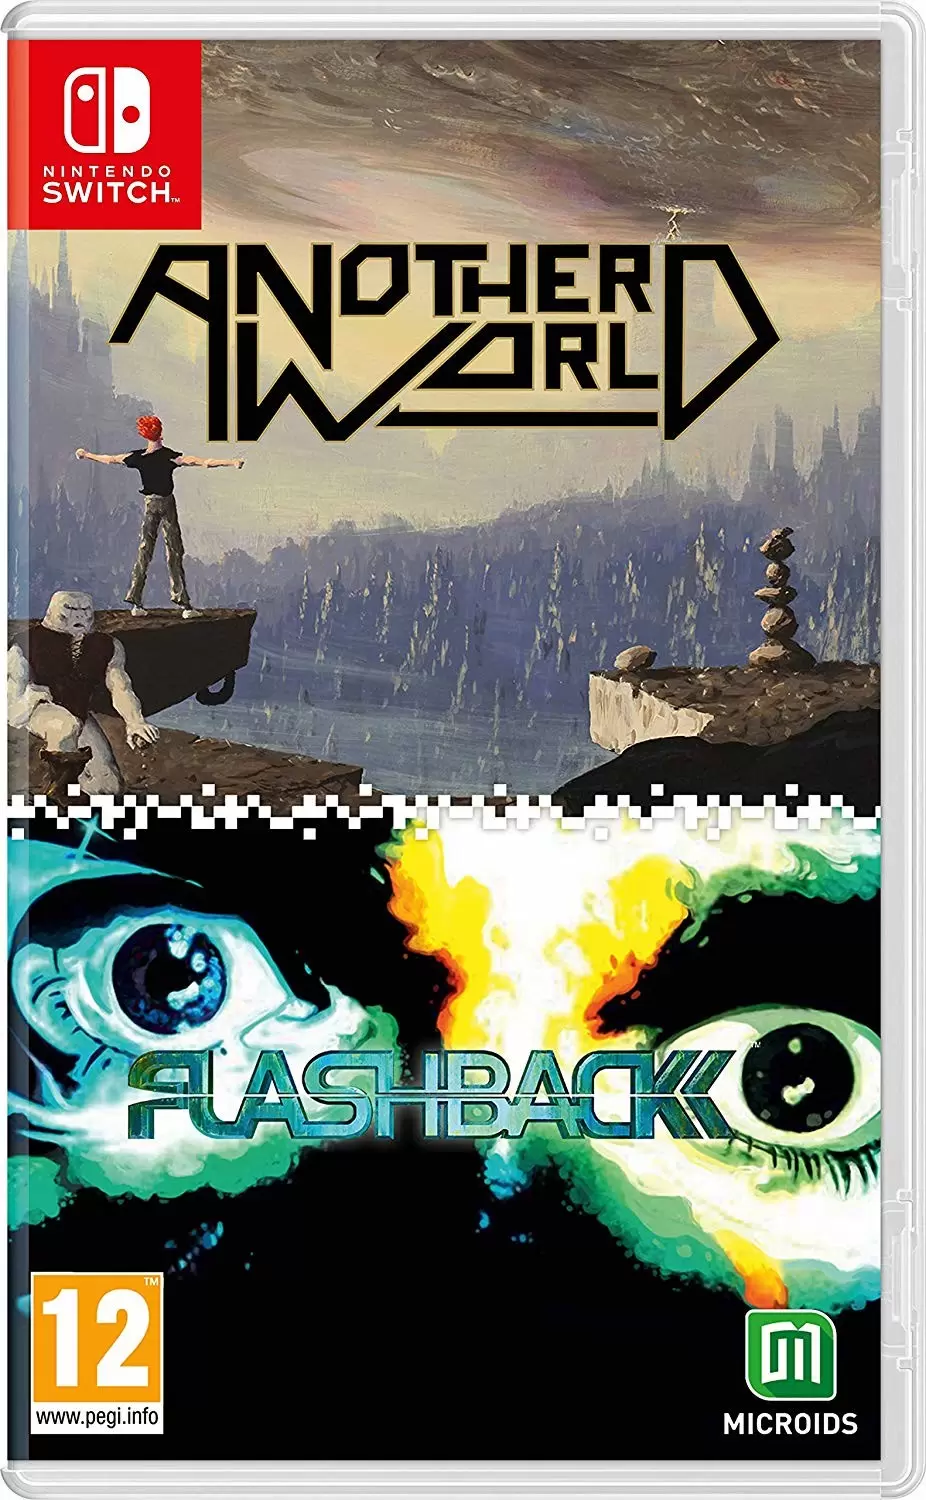 Nintendo Switch Games - Flashback / Another World Limited Edition